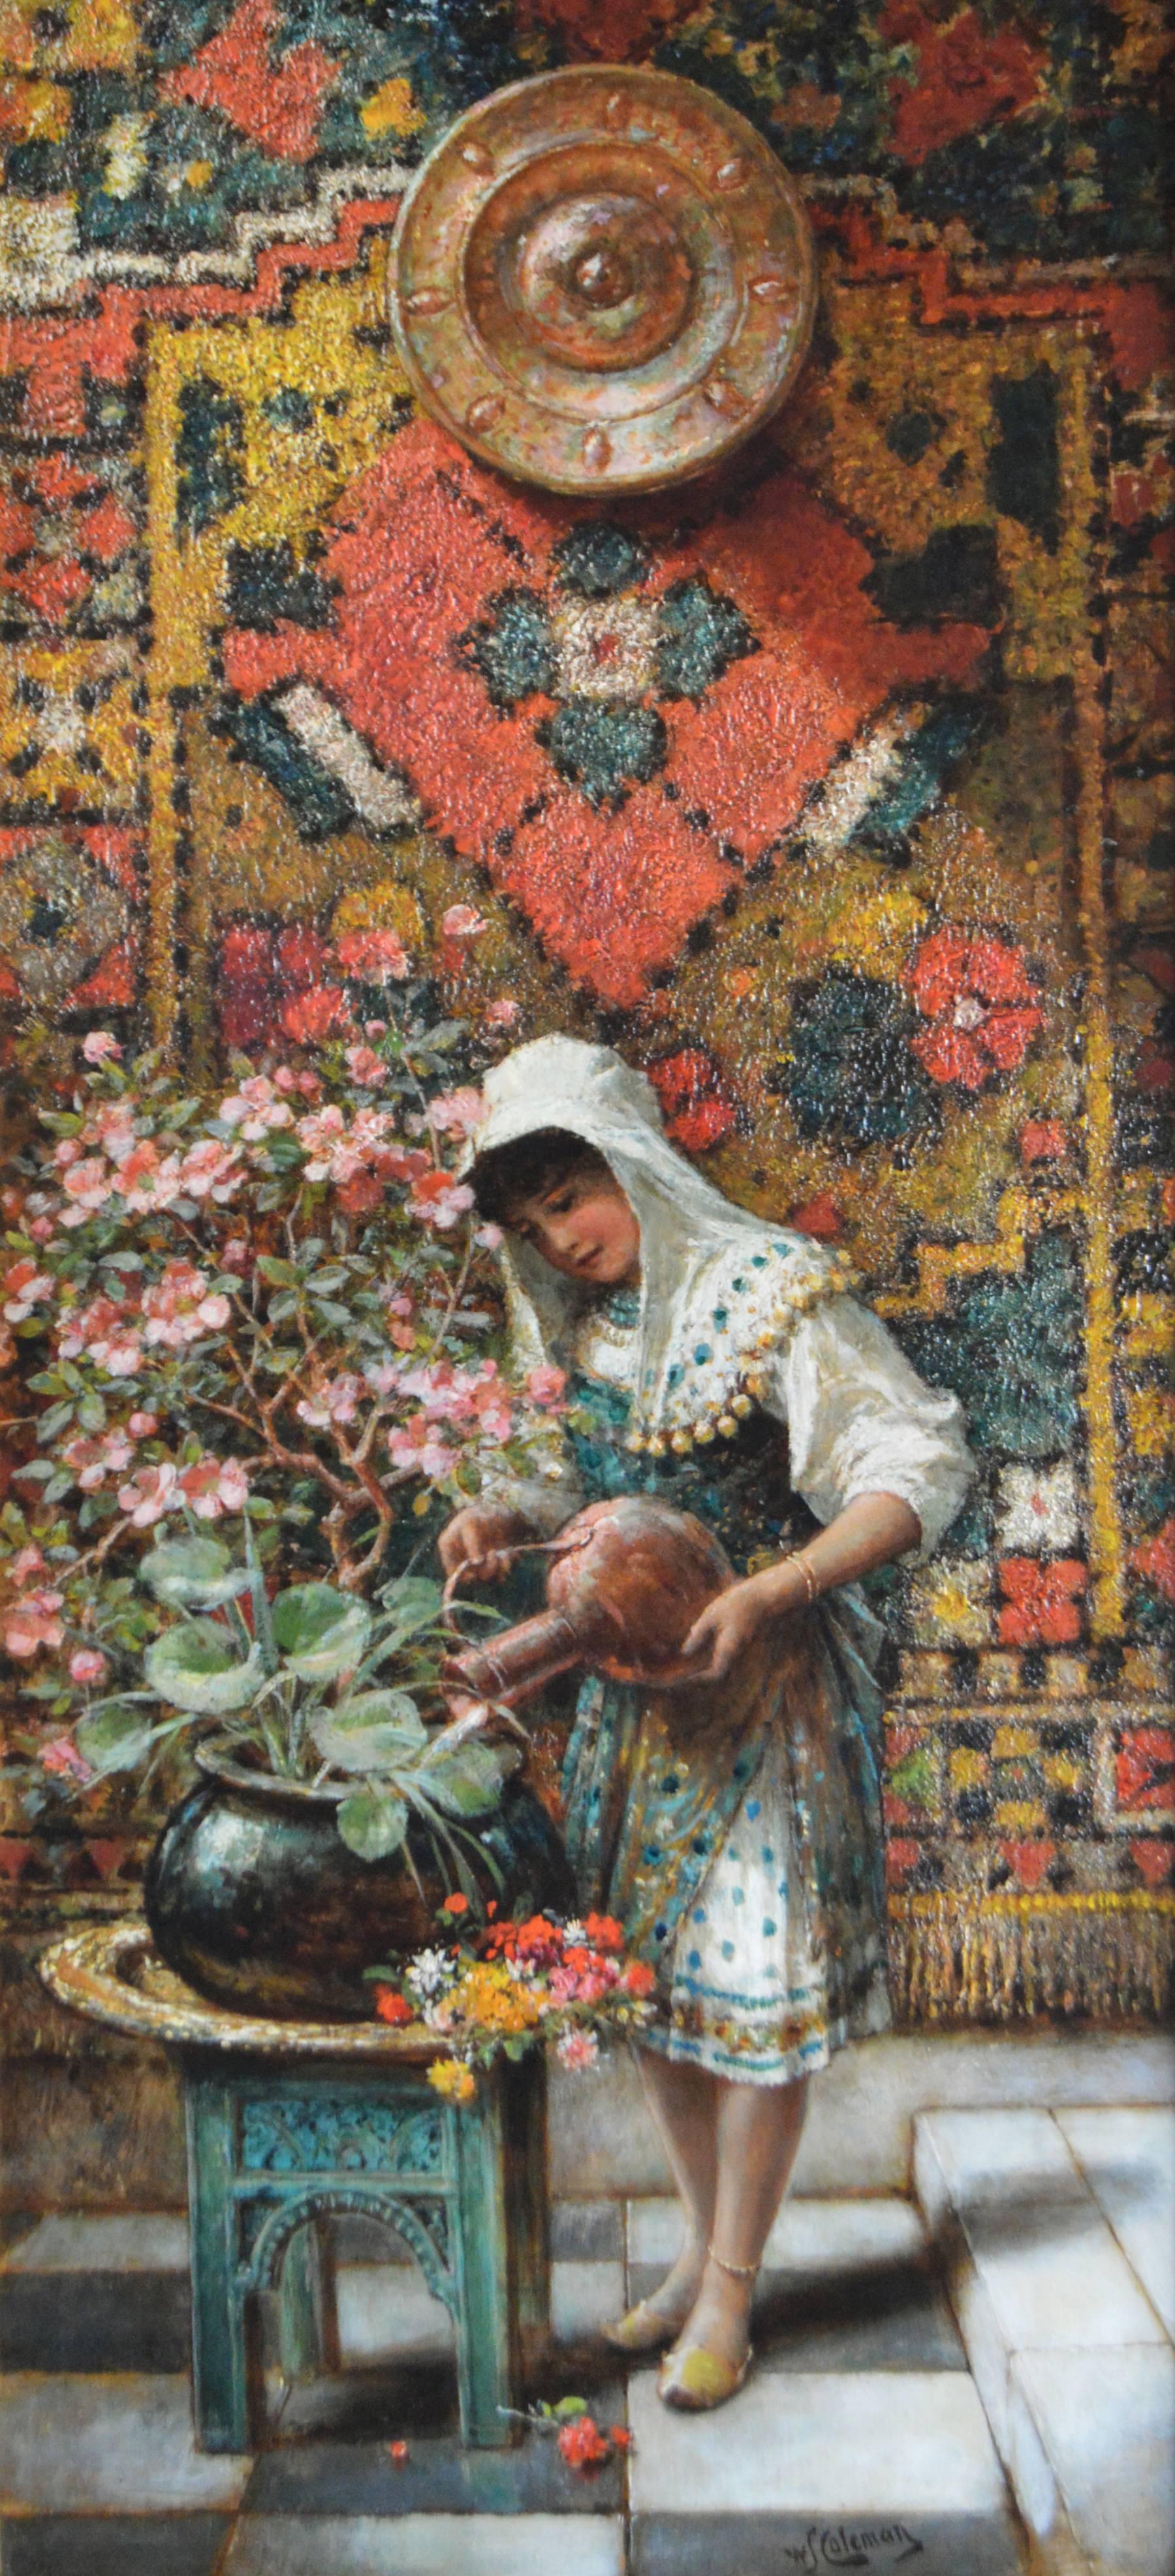 Watering the Flowers, oil on canvas - Painting by William Stephen Coleman